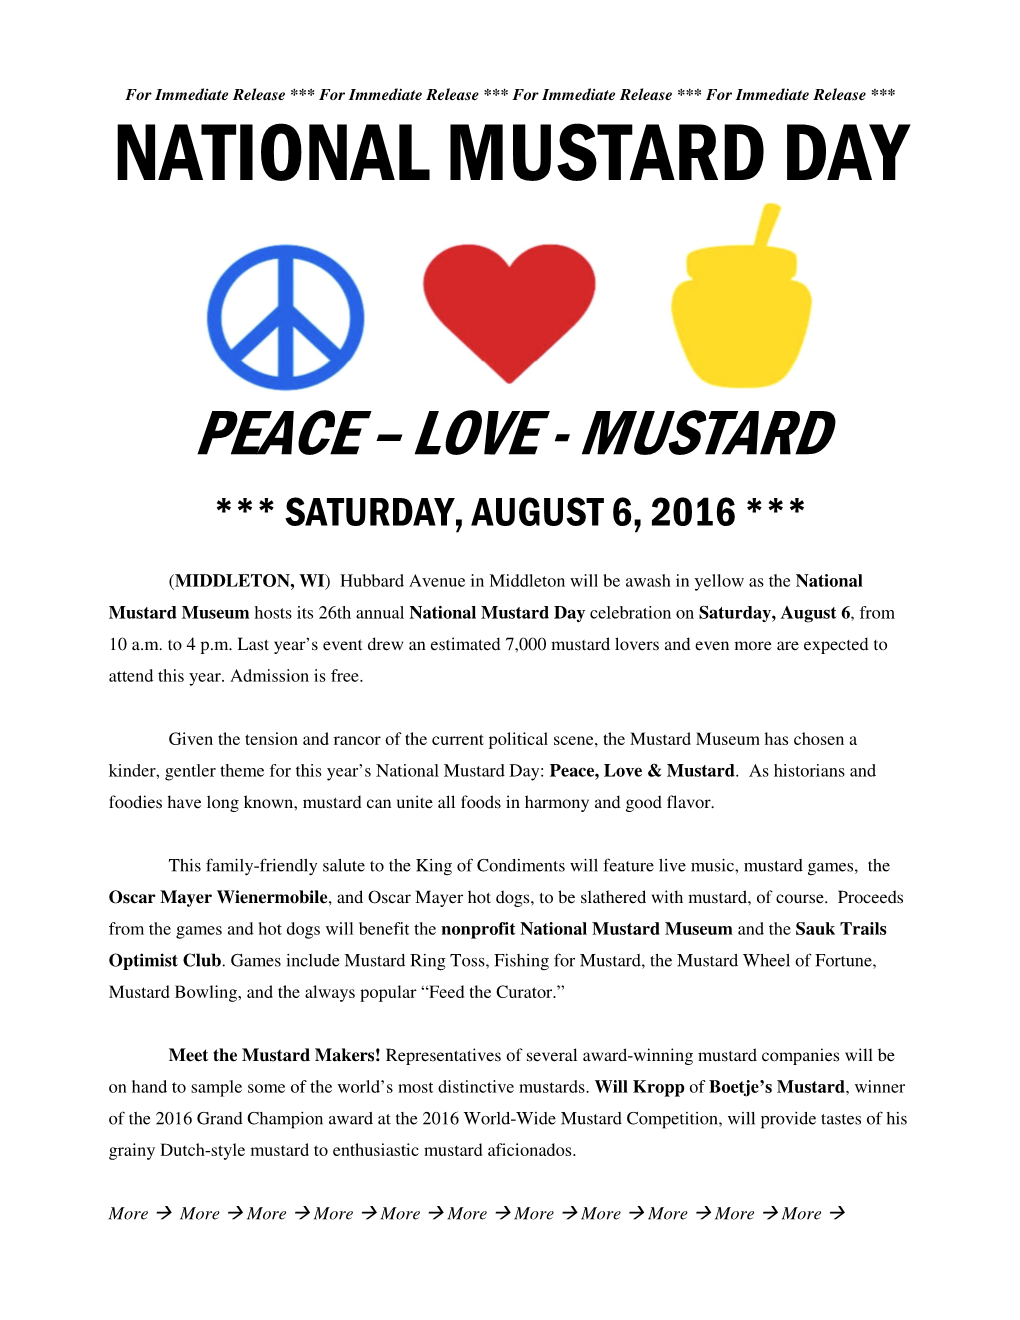 2016 National Mustard Day Press Release